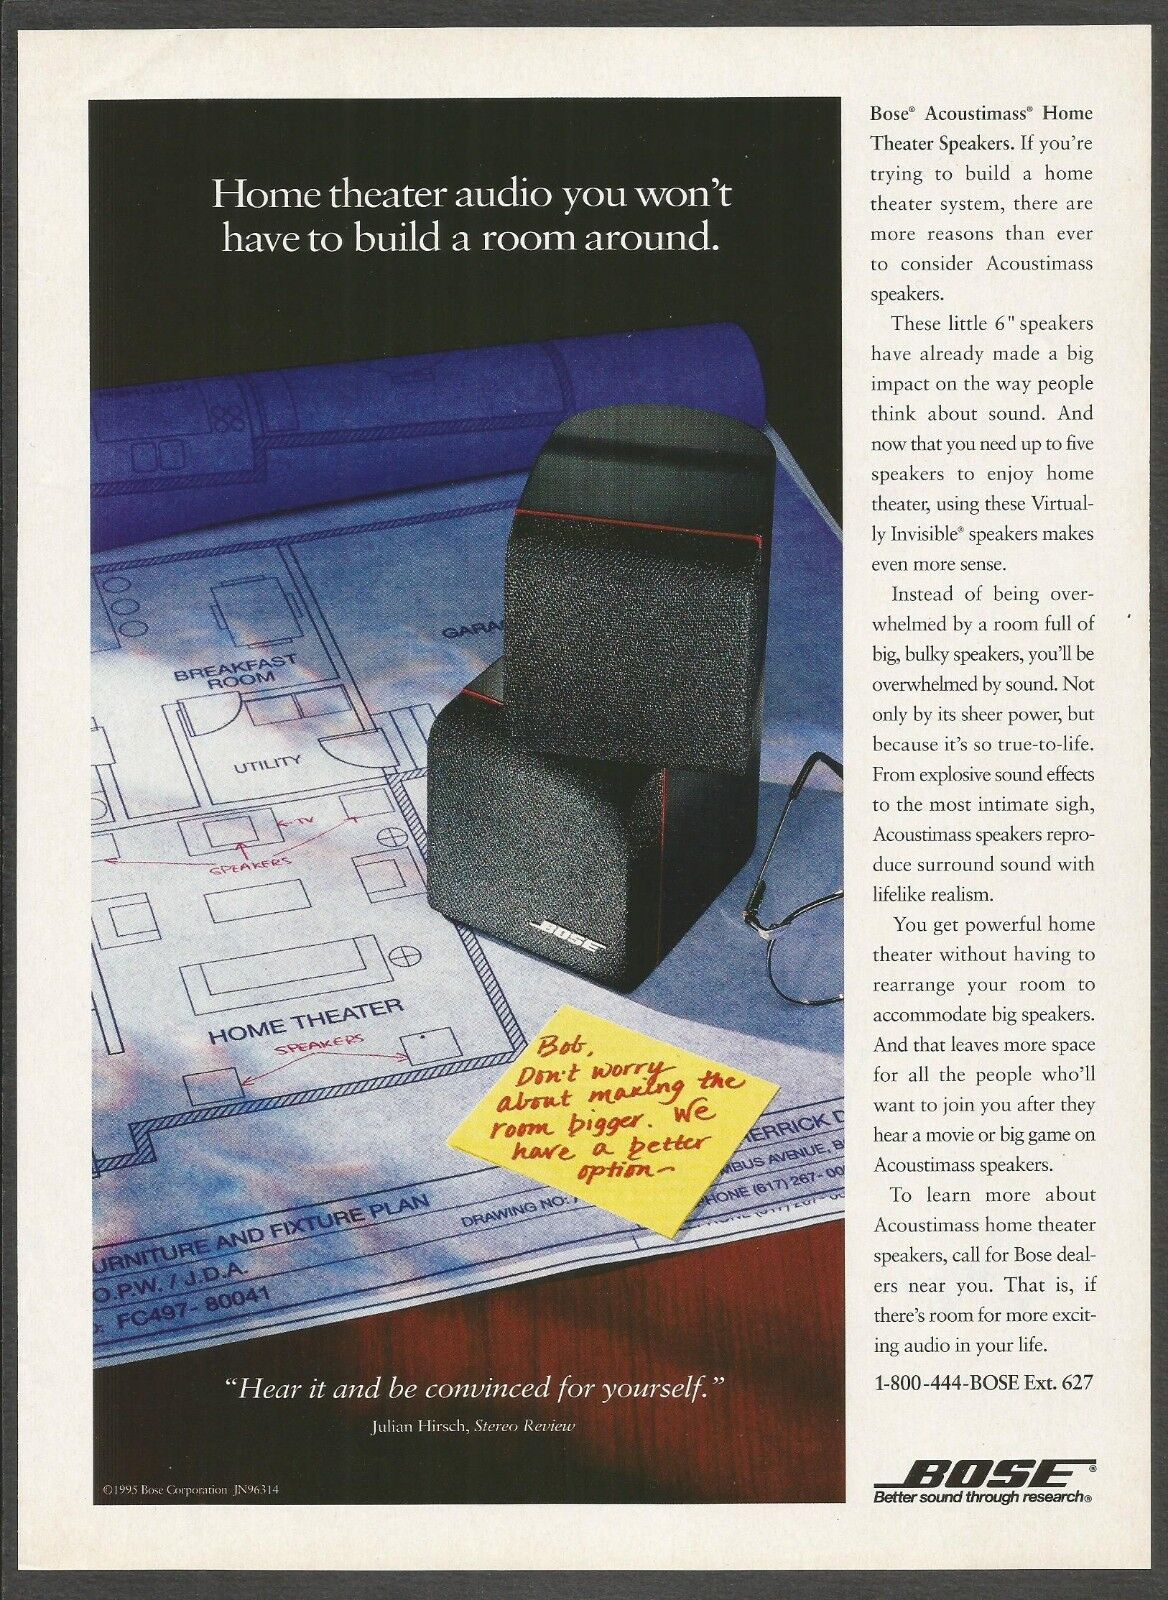 BOSE ACOUSTIMASS Home Theater Speakers - 1995 Print Ad